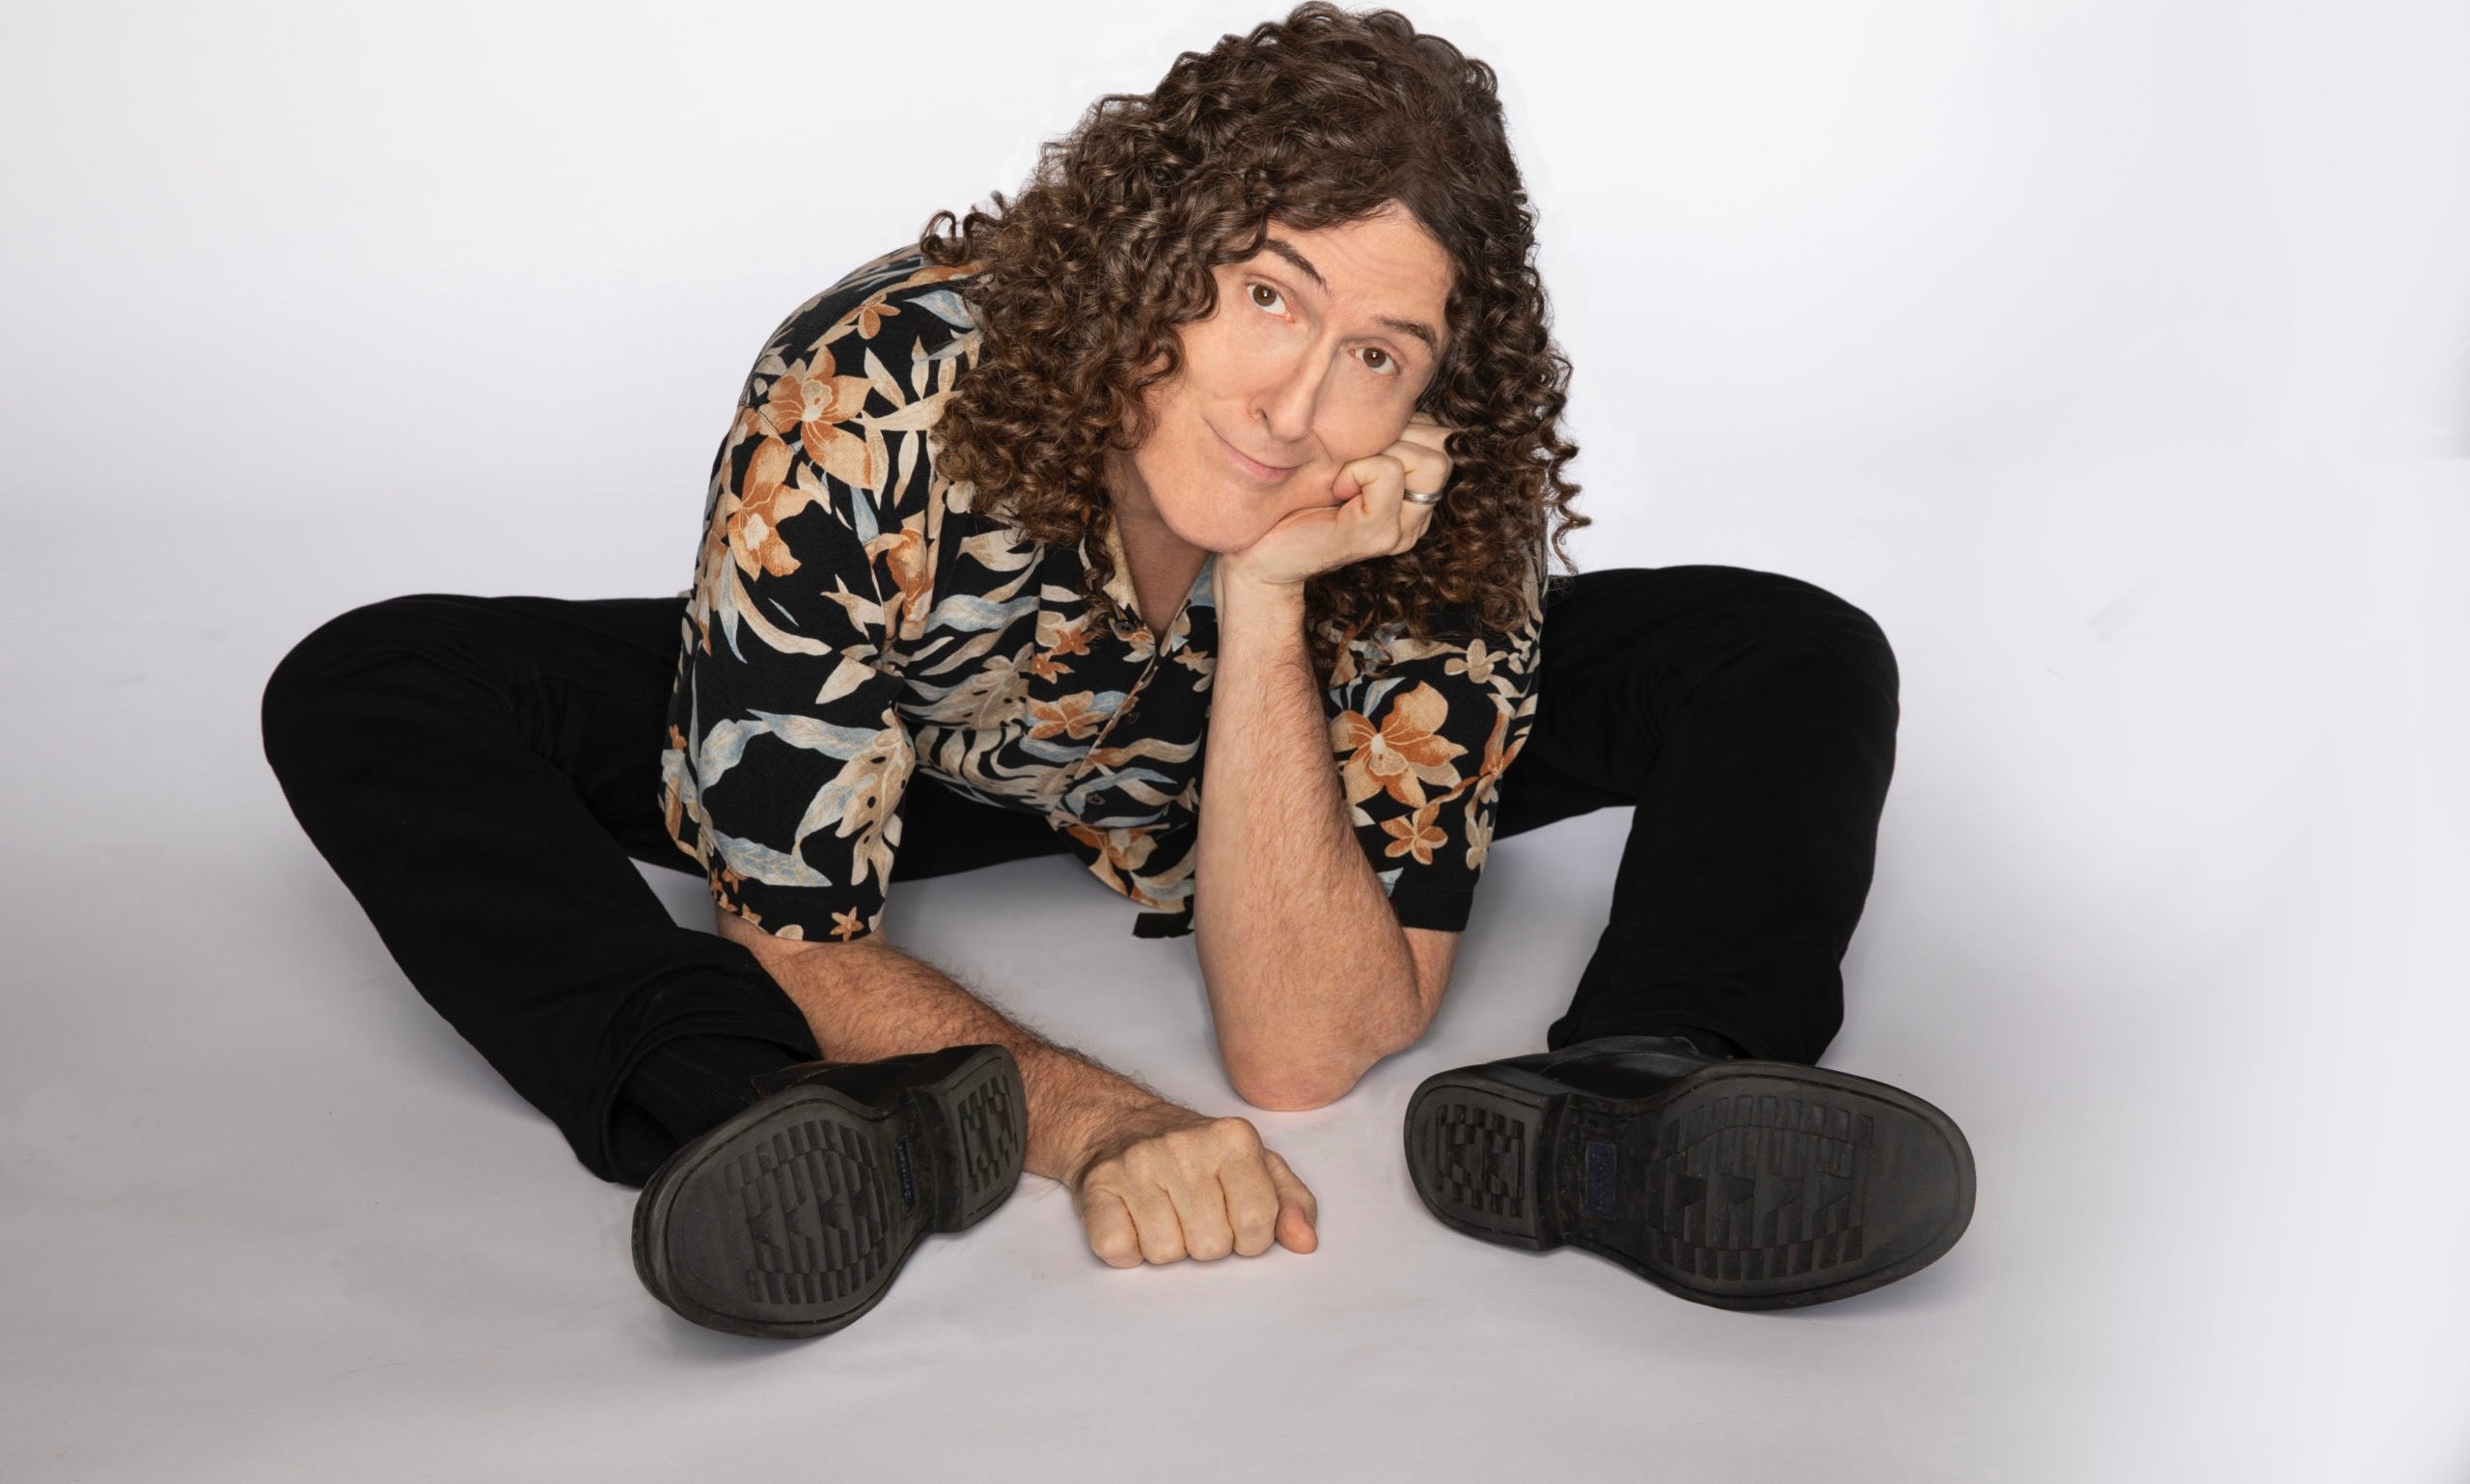 More Info for “WEIRD AL” YANKOVIC